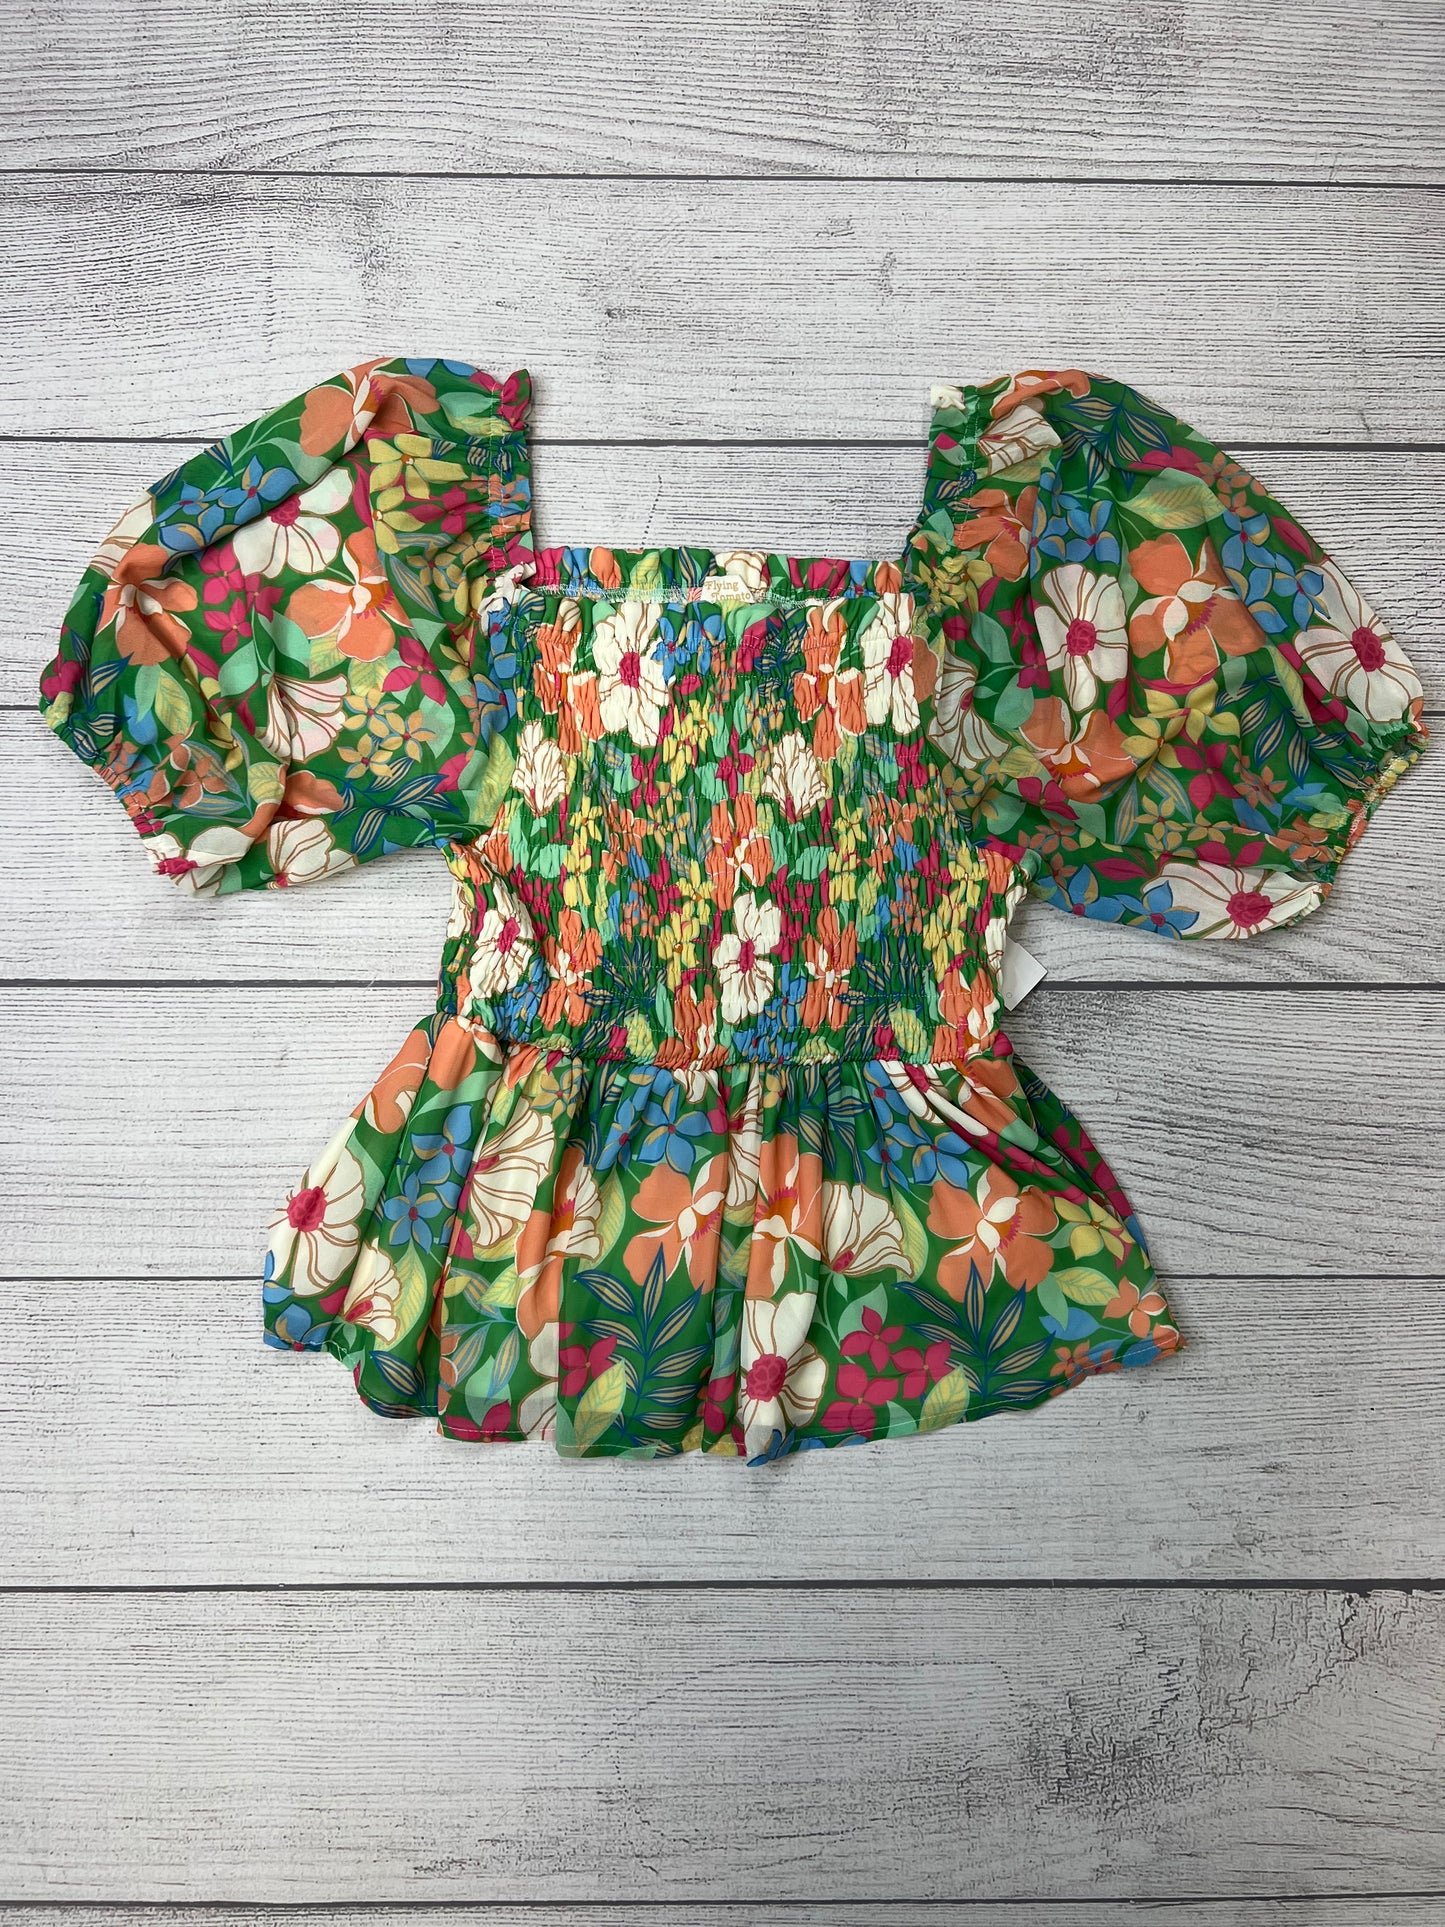 Multi-colored Top Short Sleeve Flying Tomato, Size 2x